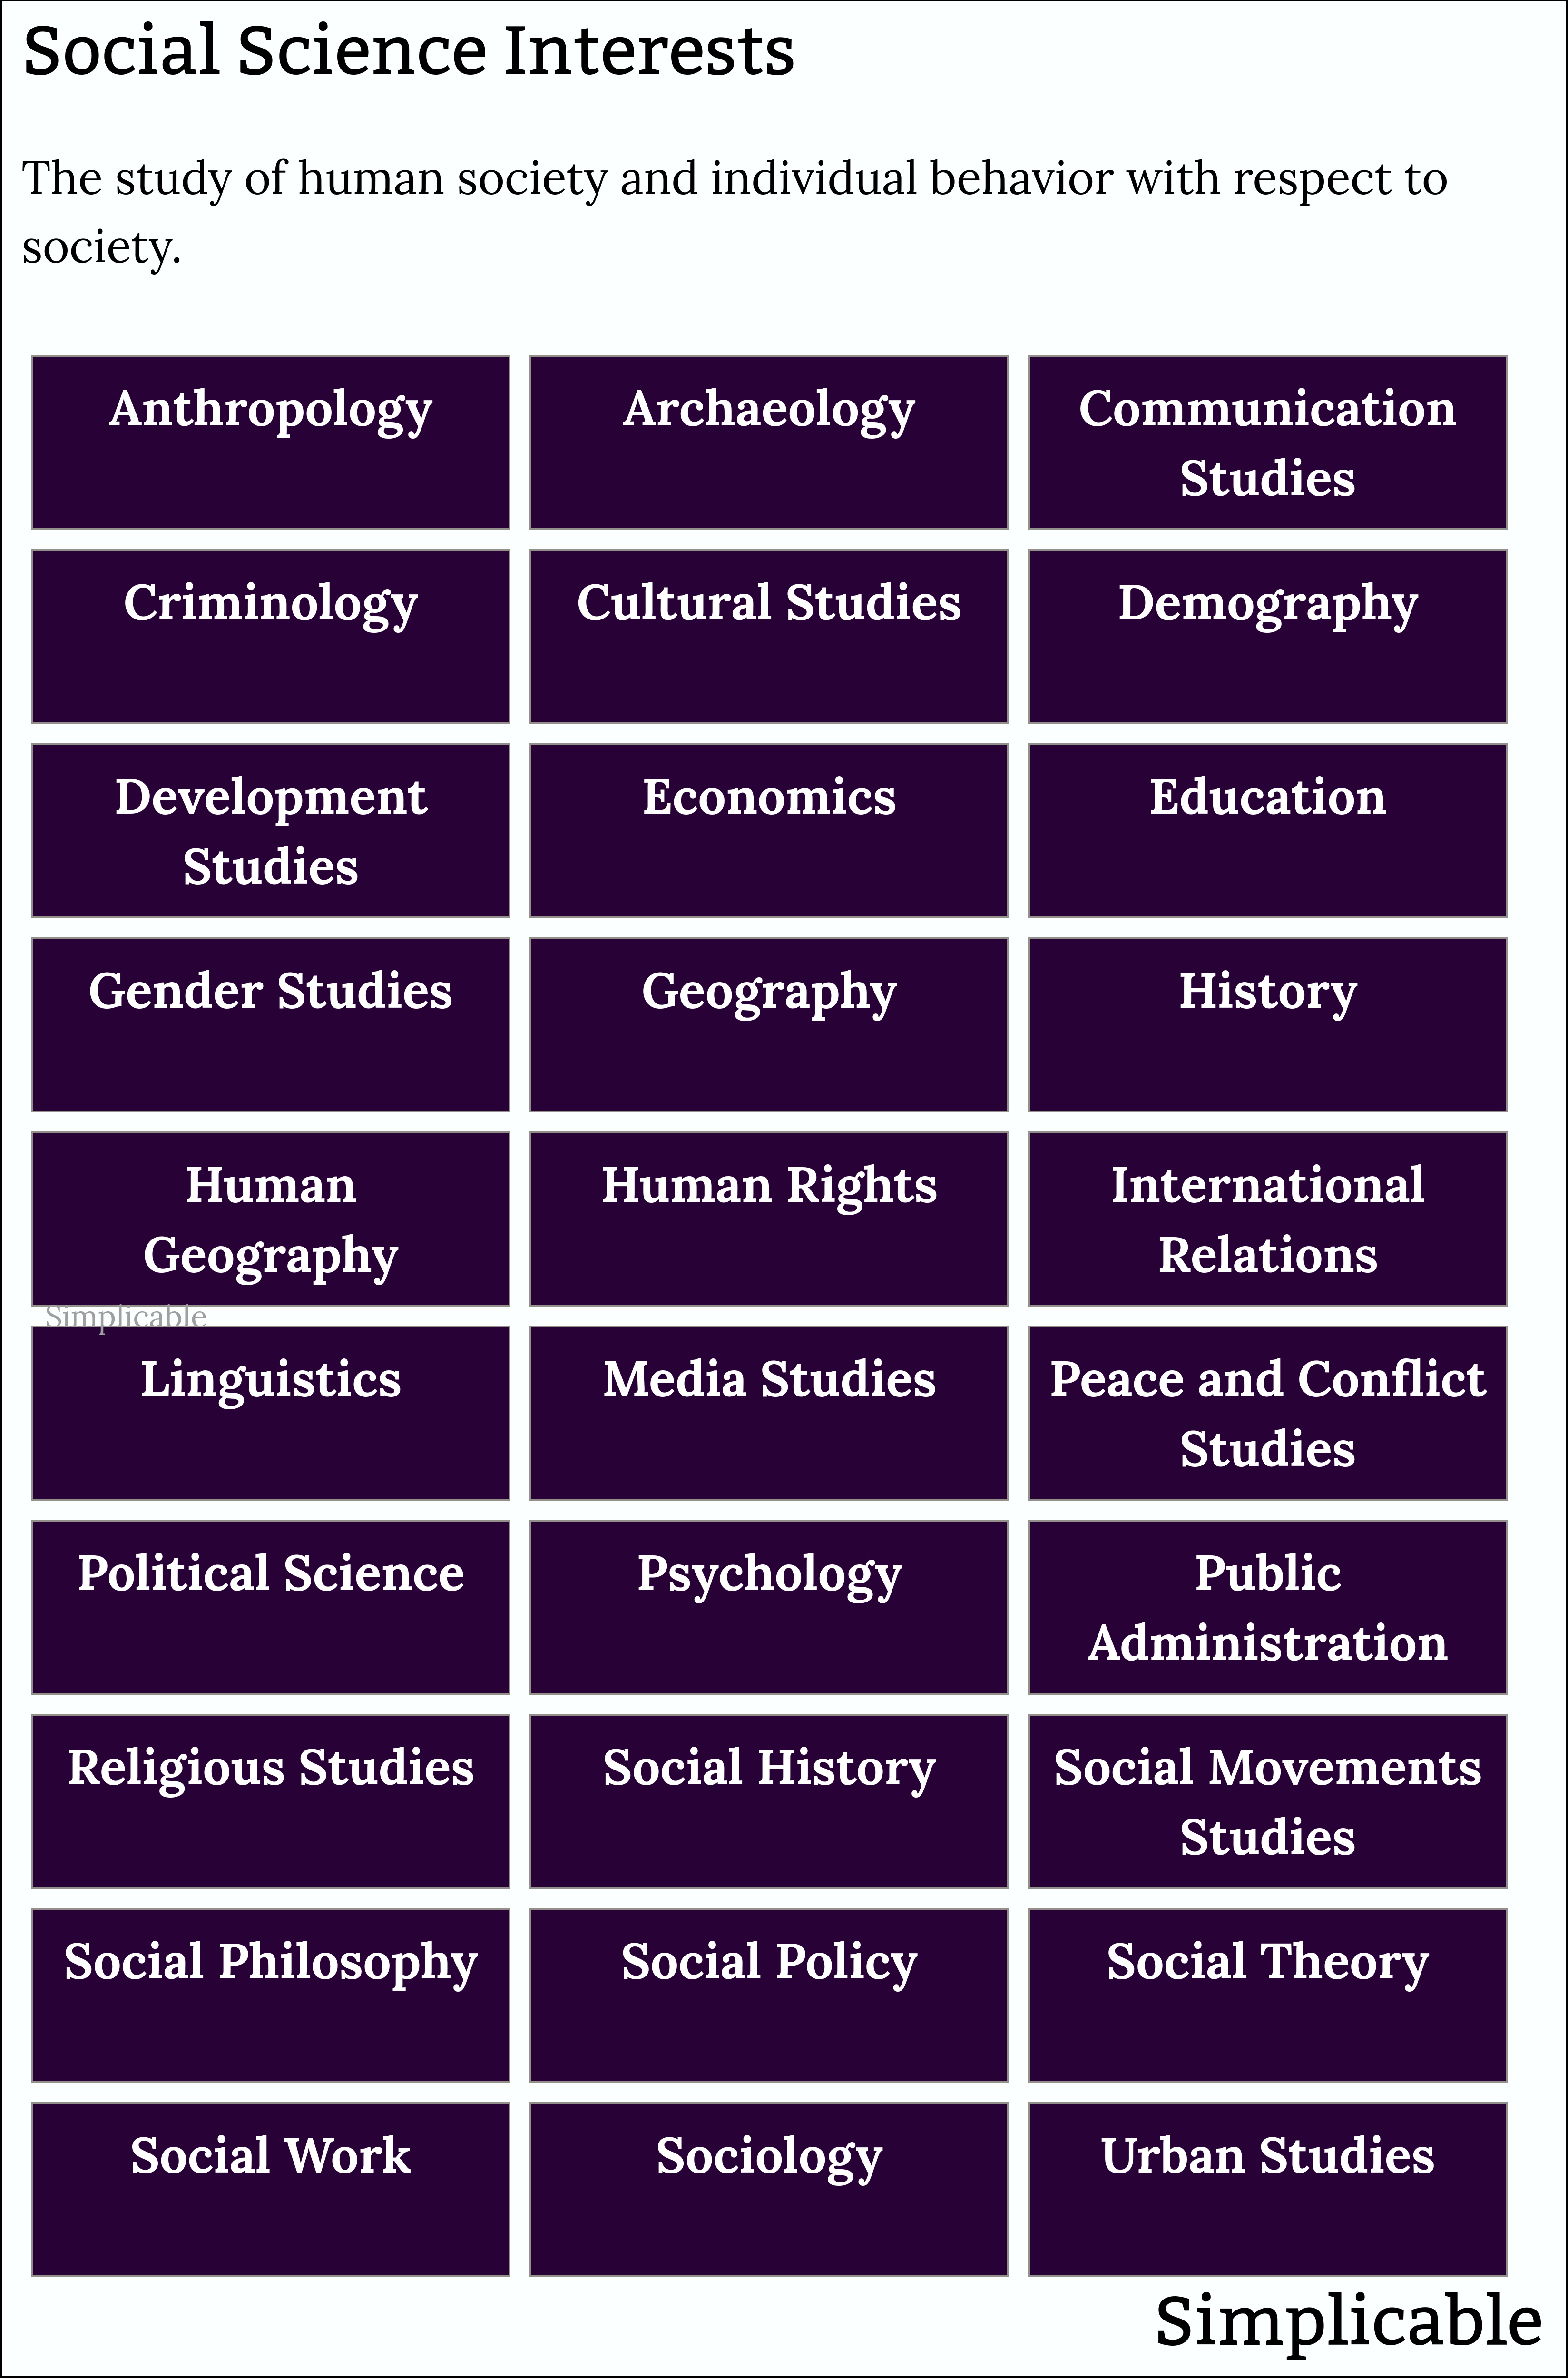 examples of social science interests